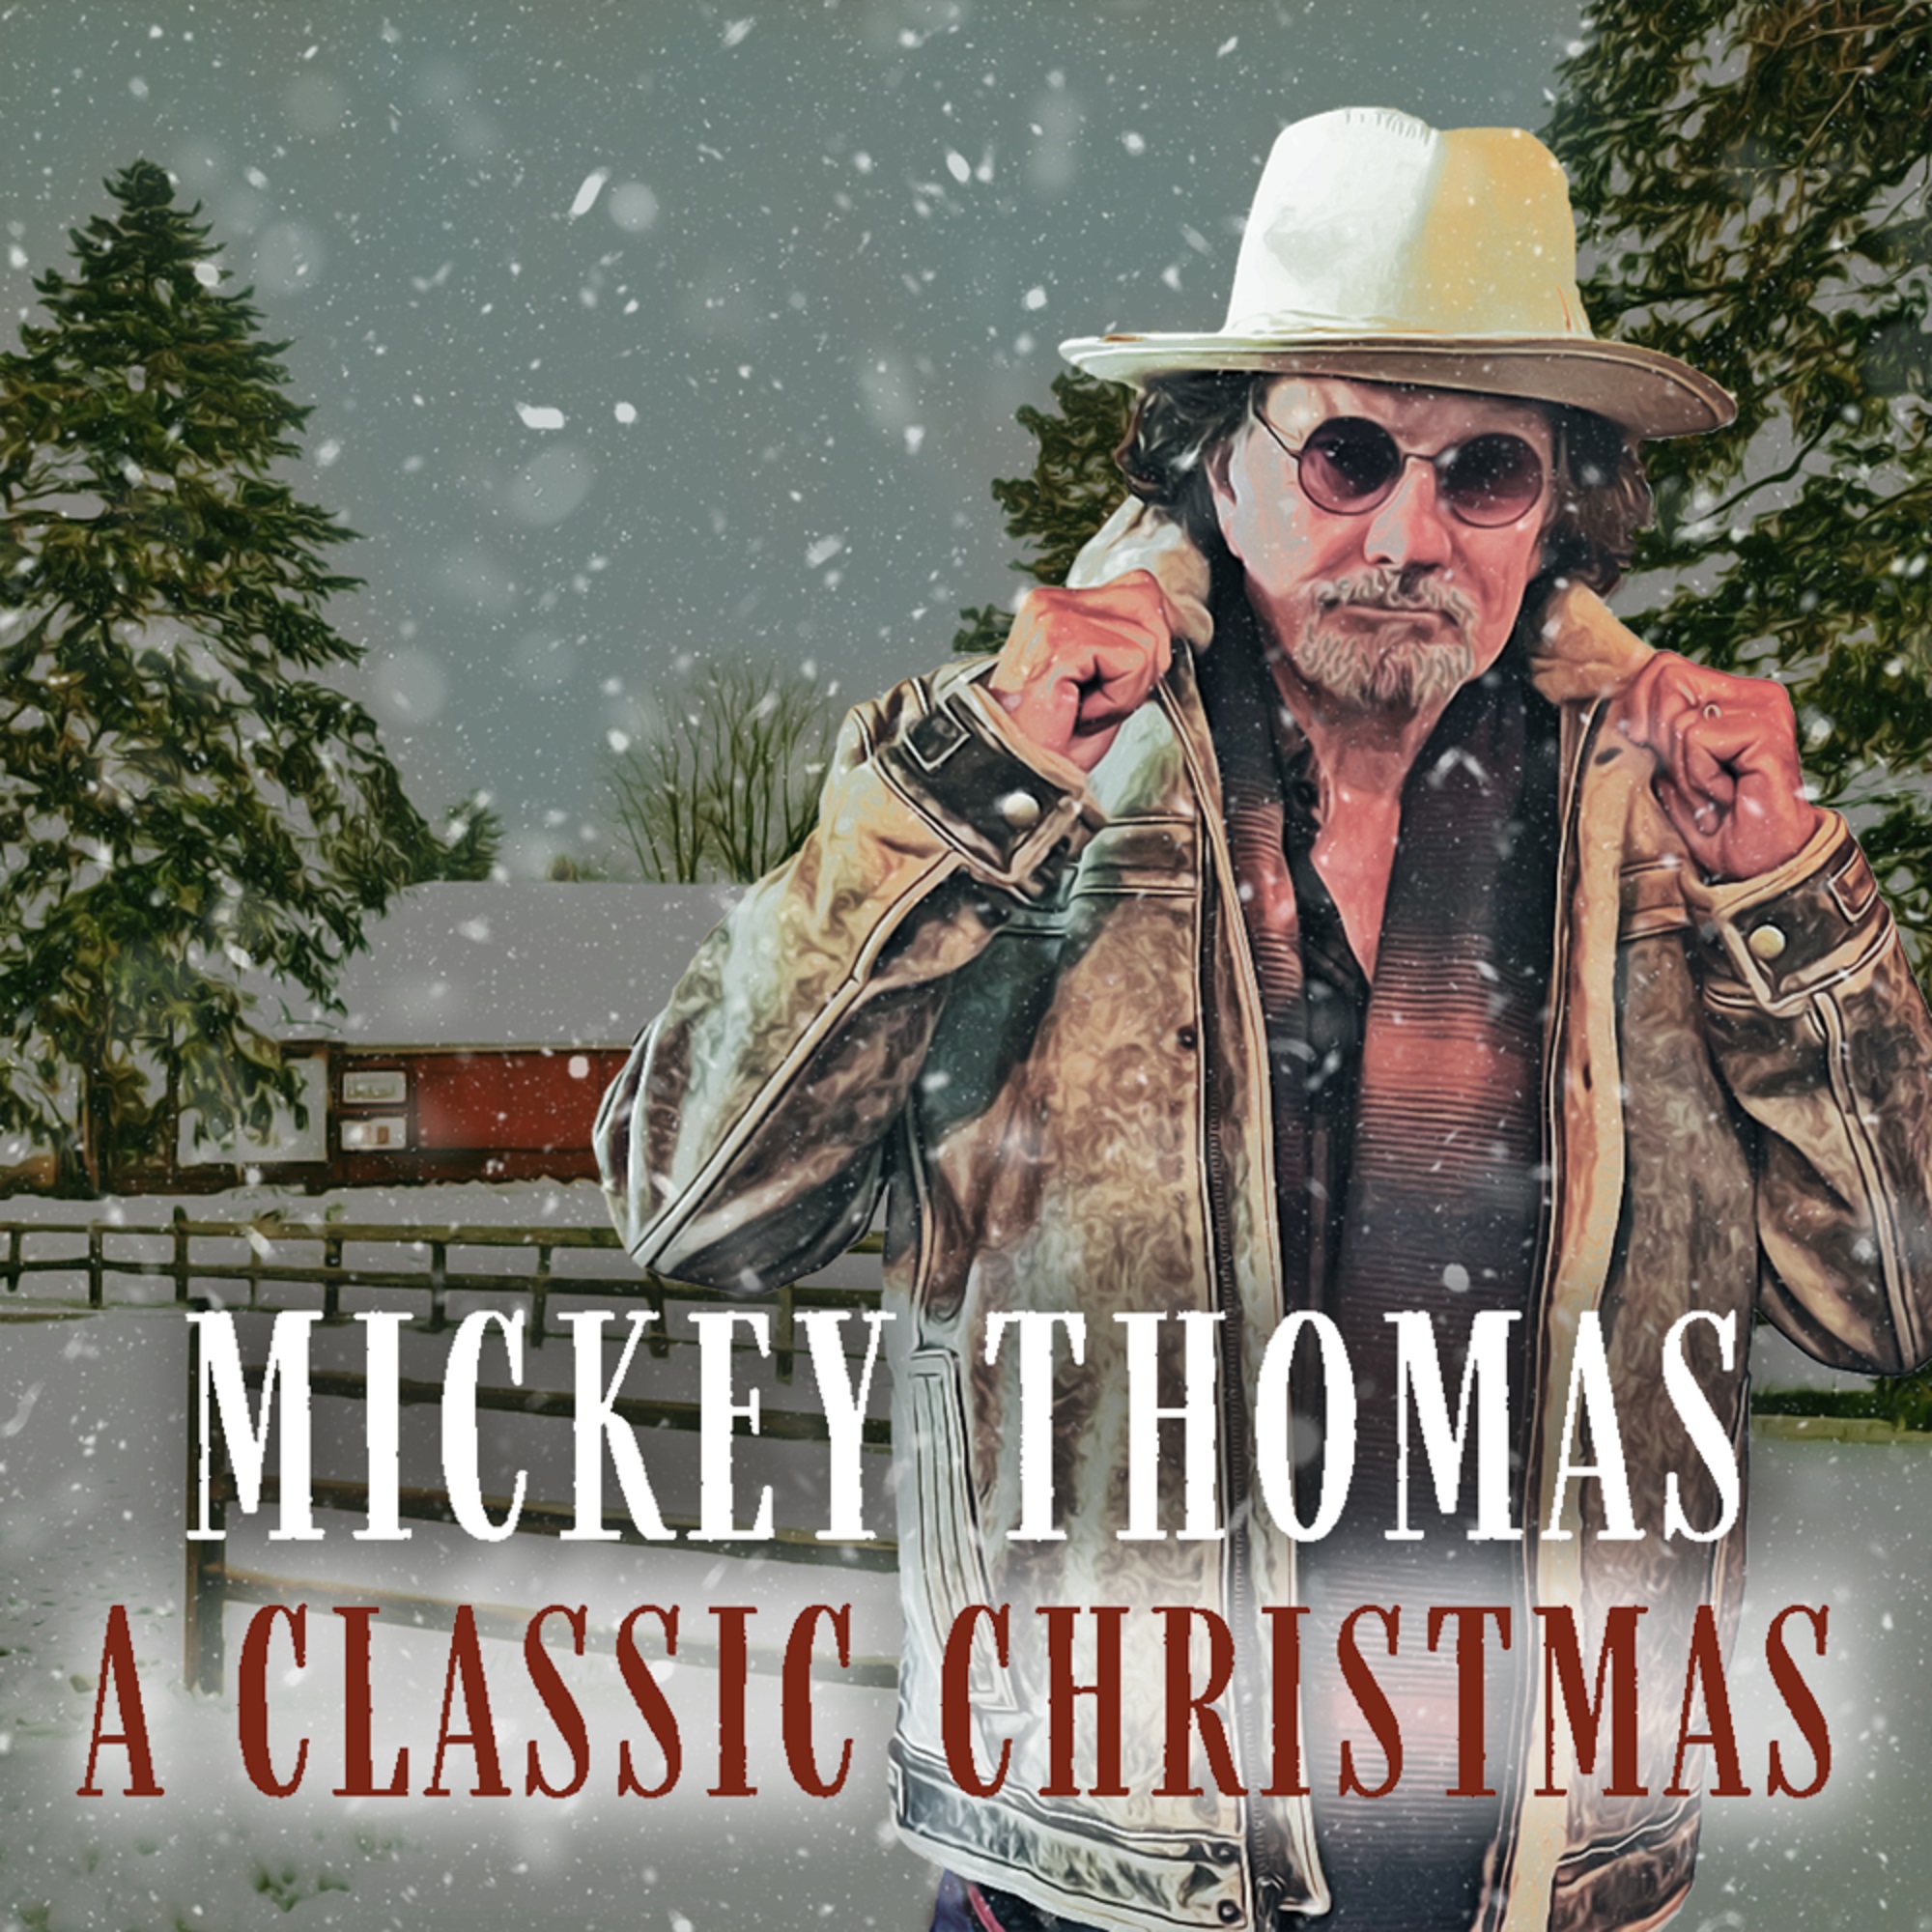 MICKEY THOMAS’ “A Classic Christmas” Released Today; Features “Have Yourself A Merry Little Christmas” and “It's The Most Wonderful Time Of The Year”